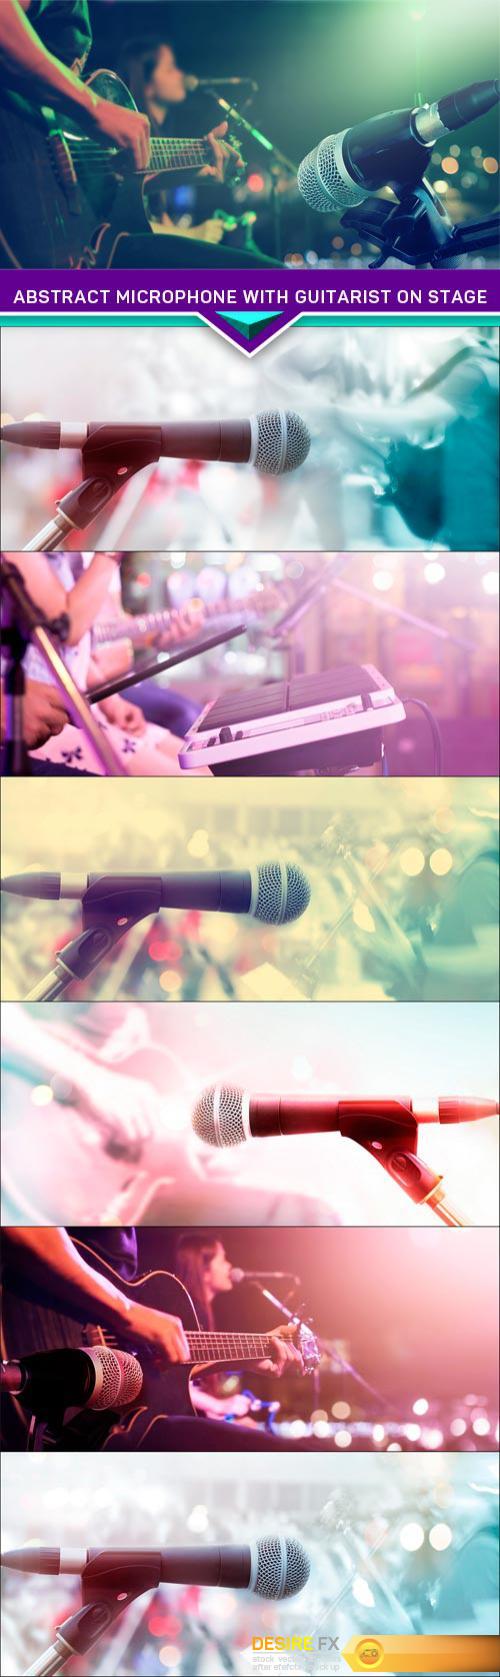 Abstract microphone with guitarist on stage 7X JPEG